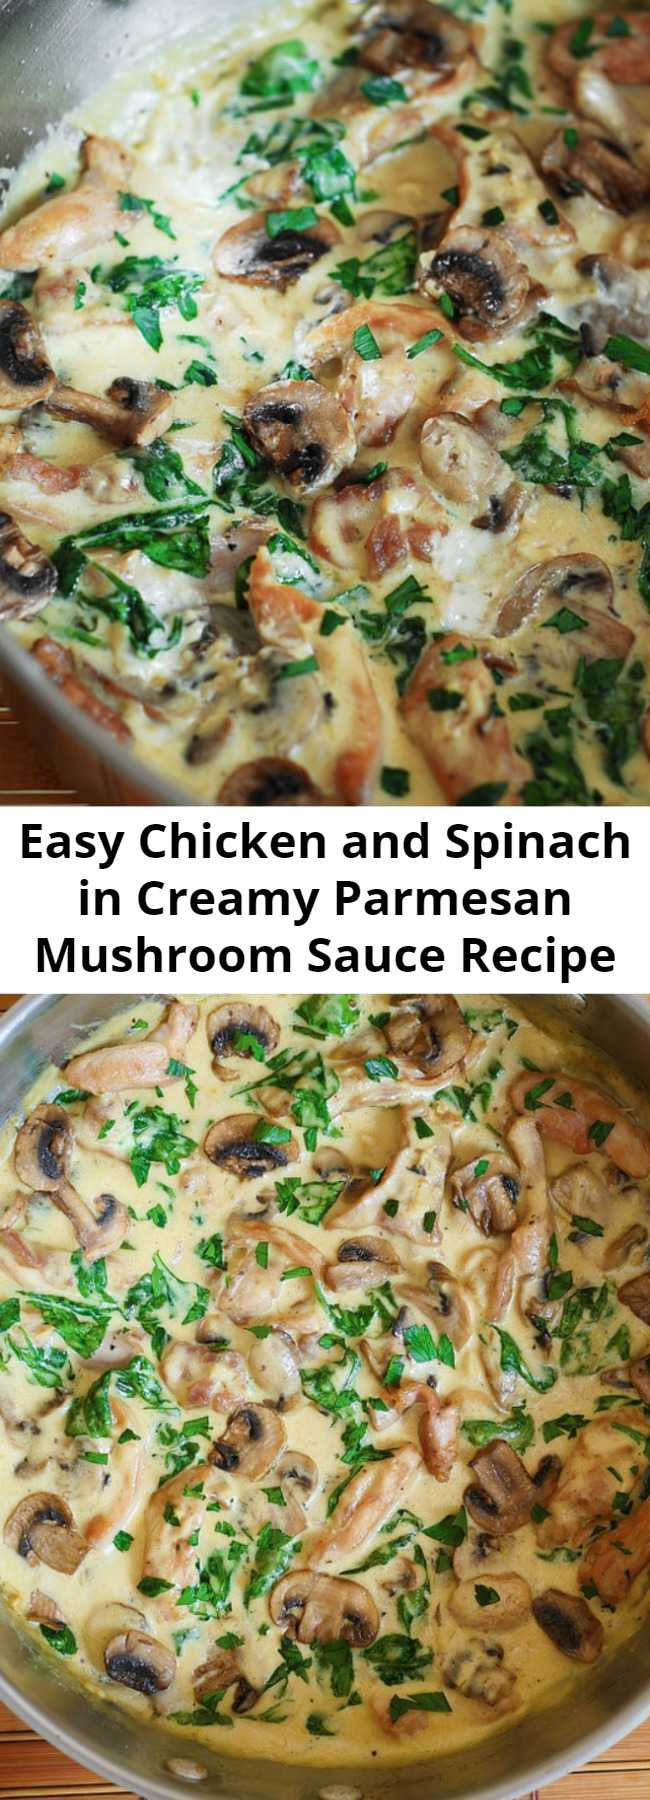 Easy Chicken and Spinach in Creamy Parmesan Mushroom Sauce Recipe - Chicken and Spinach in Creamy Parmesan Mushroom Sauce is your perfect comfort food as well as an easy midweek dinner! Using boneless and skinless chicken thighs guarantees juicy and tender result